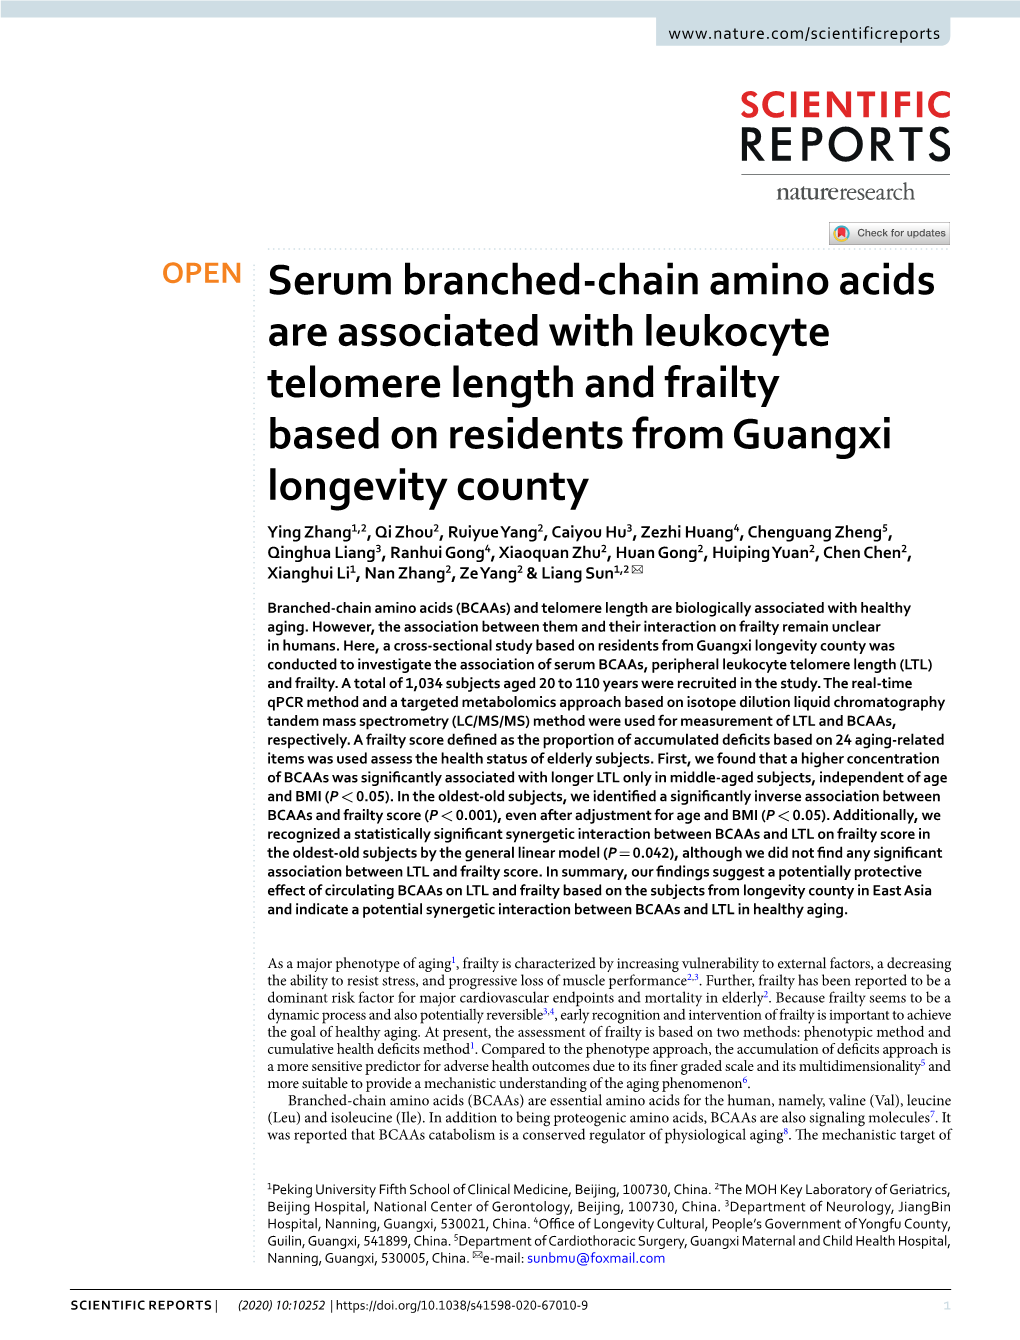 Serum Branched-Chain Amino Acids Are Associated with Leukocyte